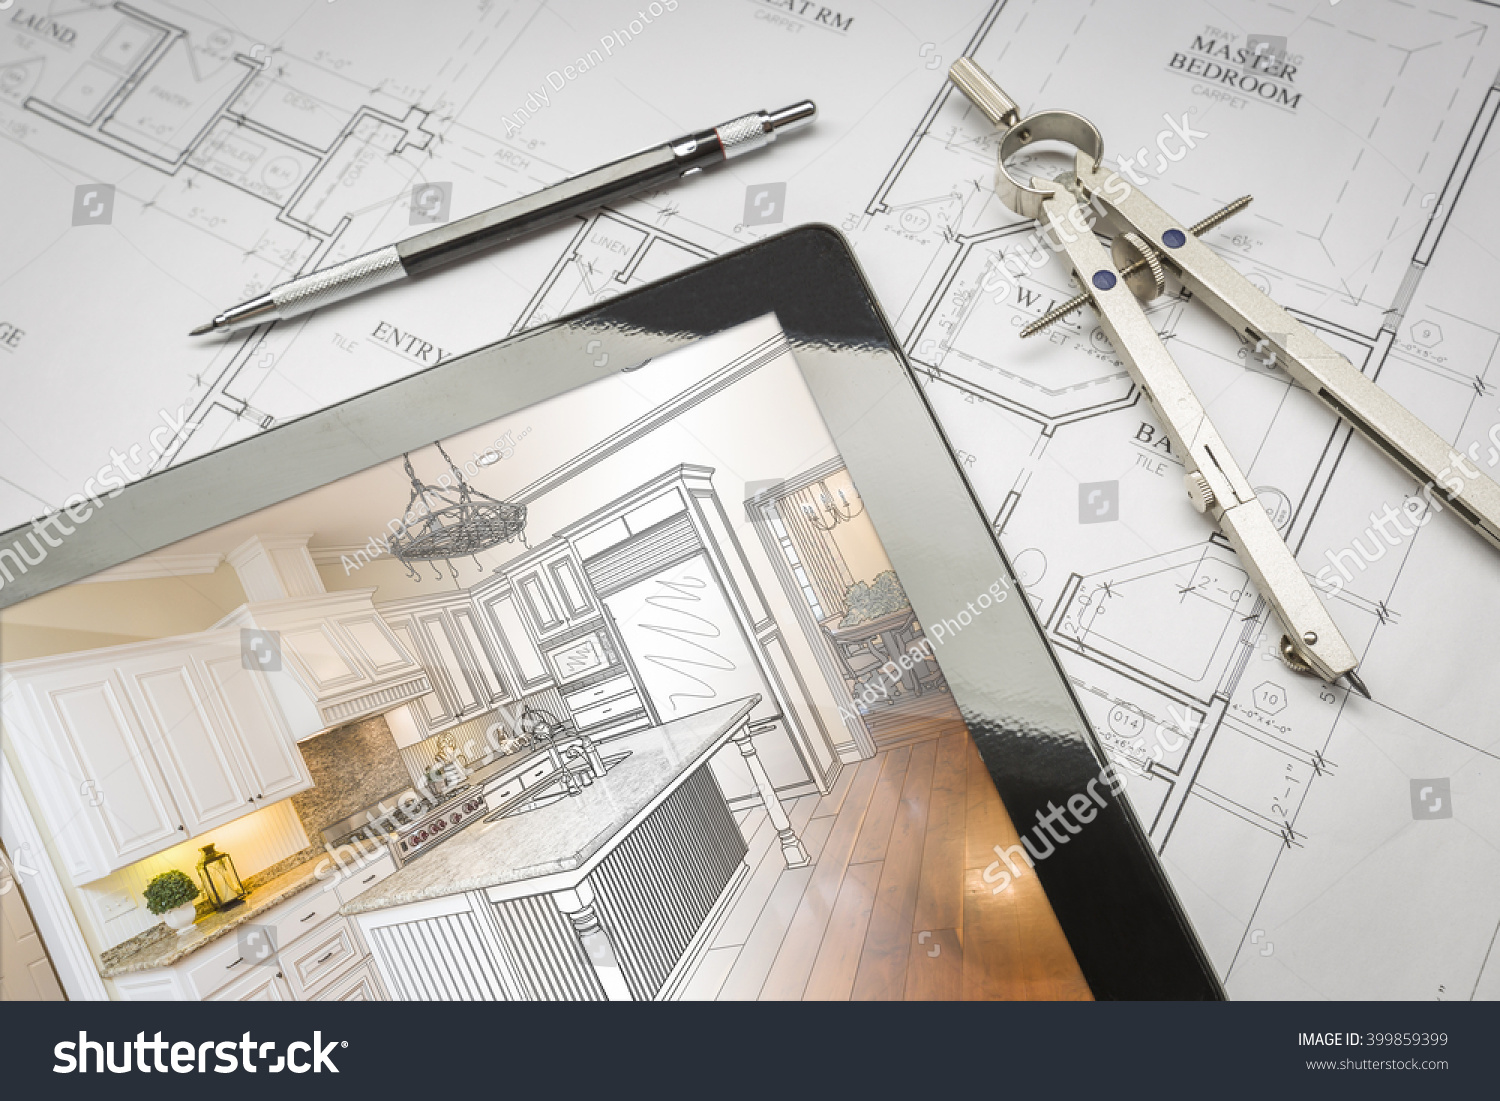 Computer Tablet Showing Kitchen Illustration Sitting On House Plans With Pencil and Compass. #399859399